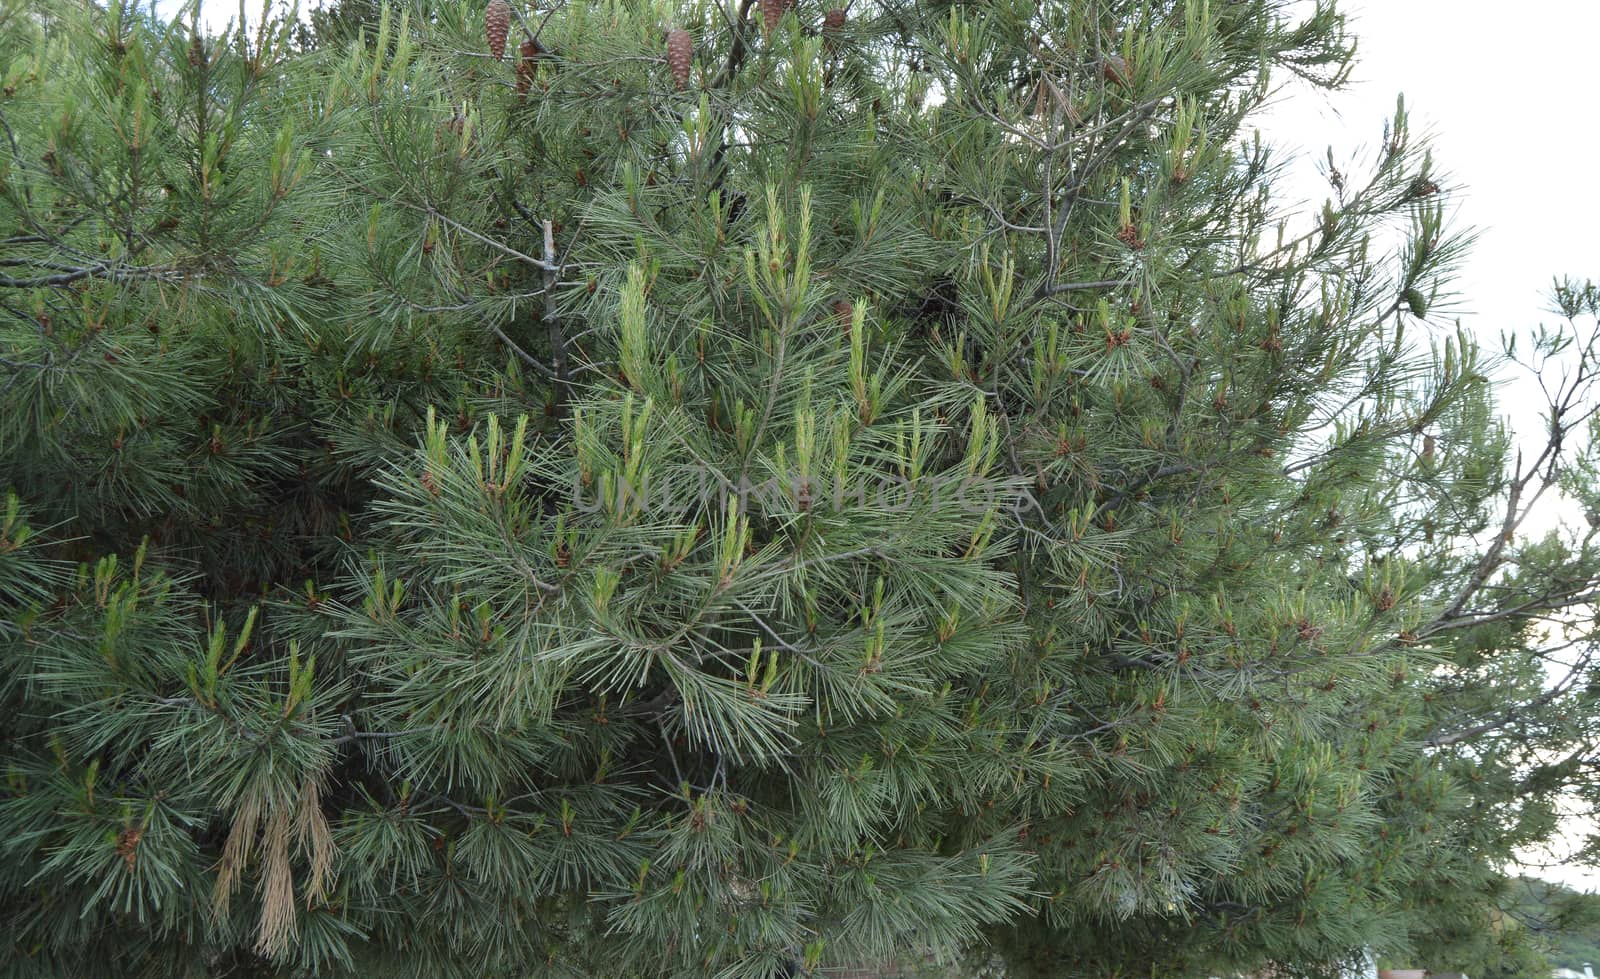 Pine tree with young shoots on twigs, coniferous trees.